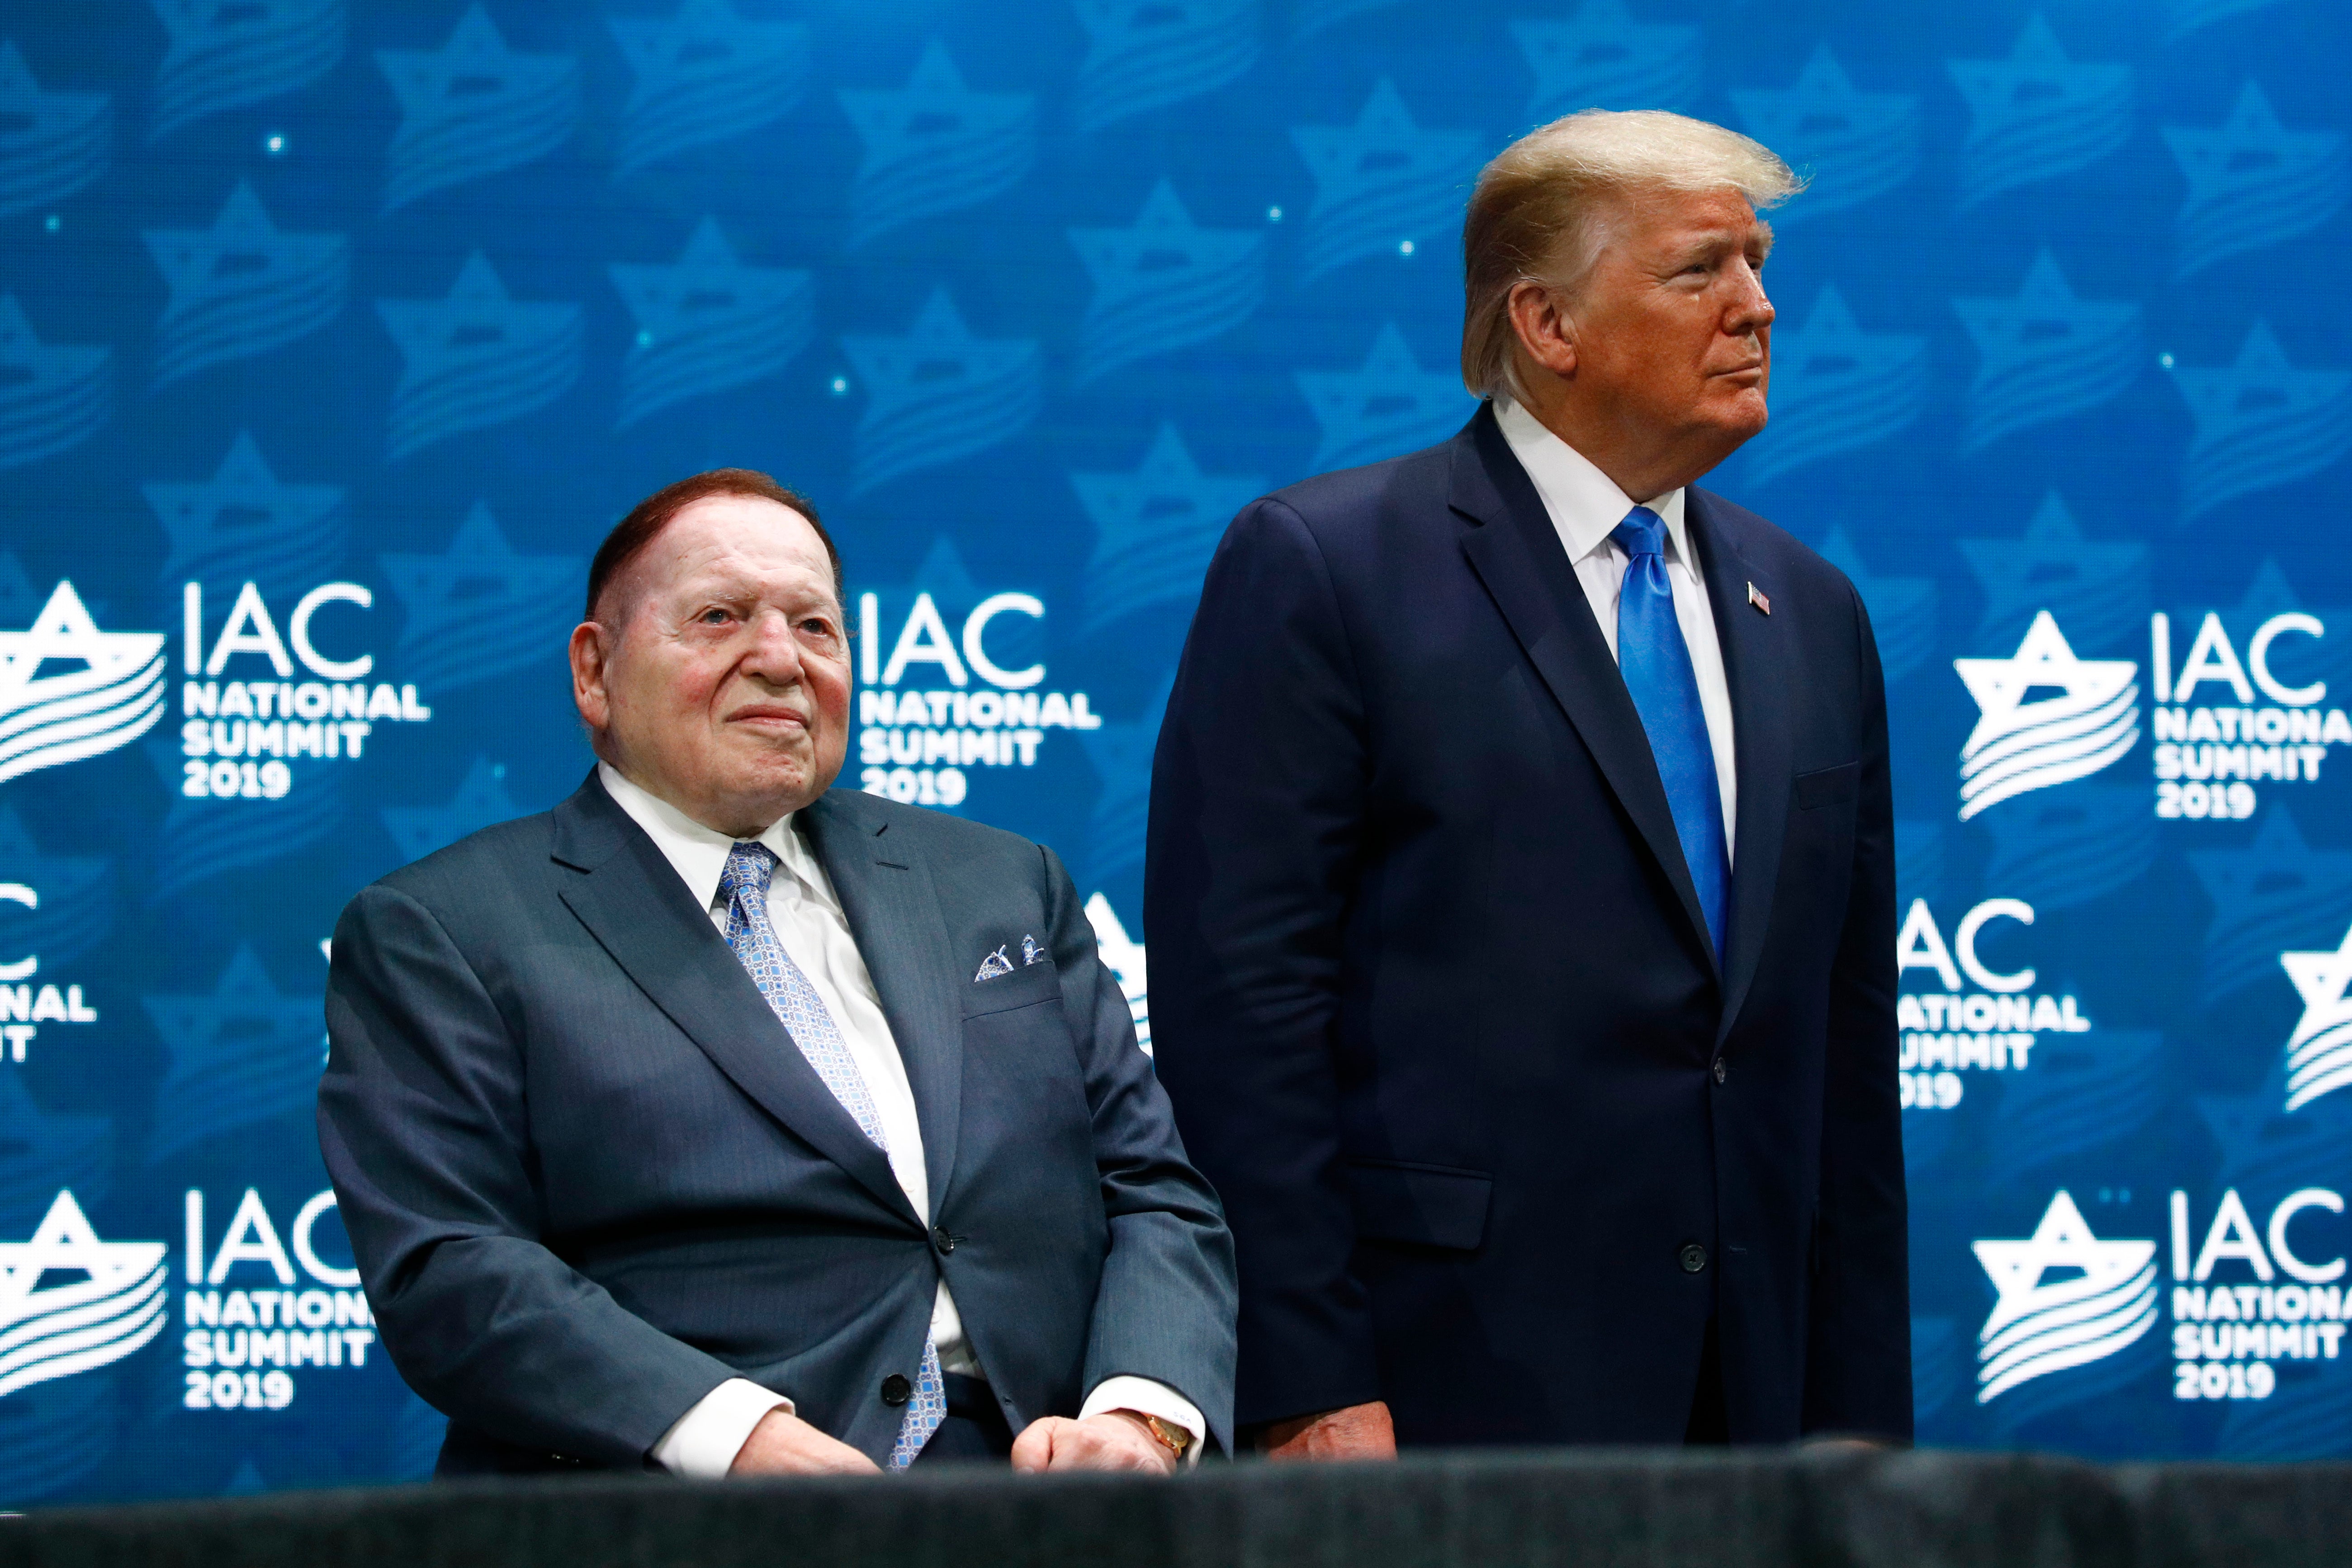 Trump, Pence and Reid react to the death of Sheldon Adelson Las Vegas Mike Pence Sheldon adelson Harry Reid Donald Trump